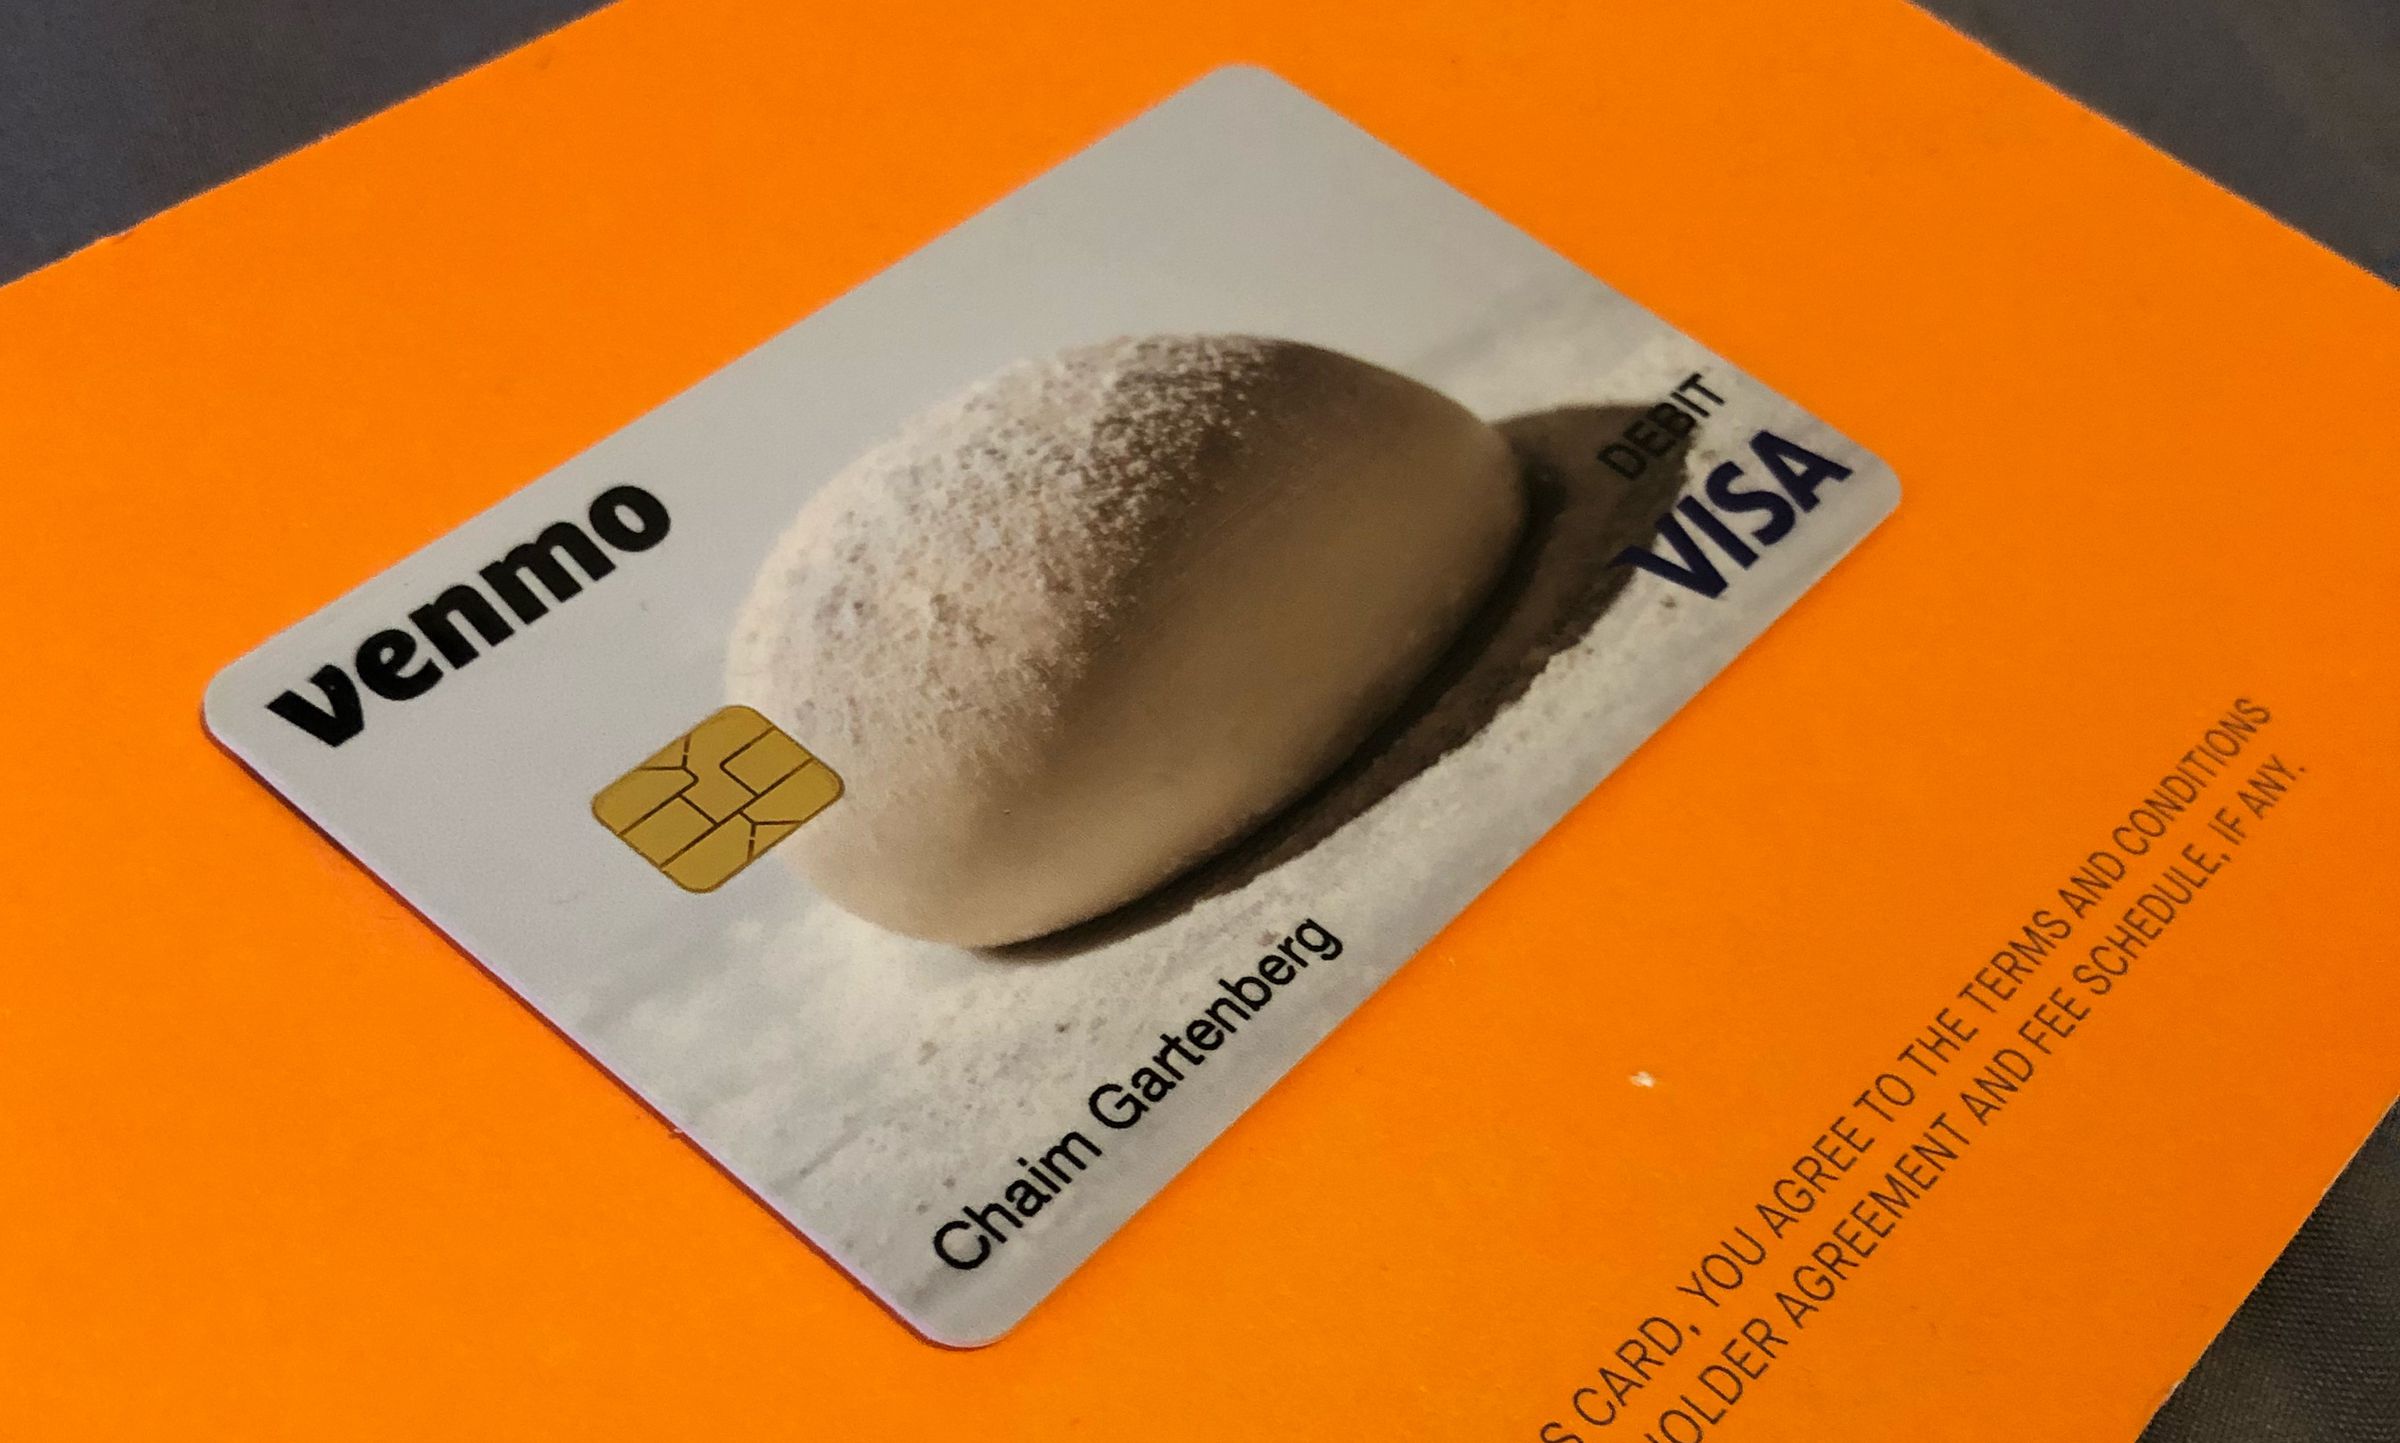 Venmo has been beta testing this Visa card for months, but the final version uses Mastercard instead.